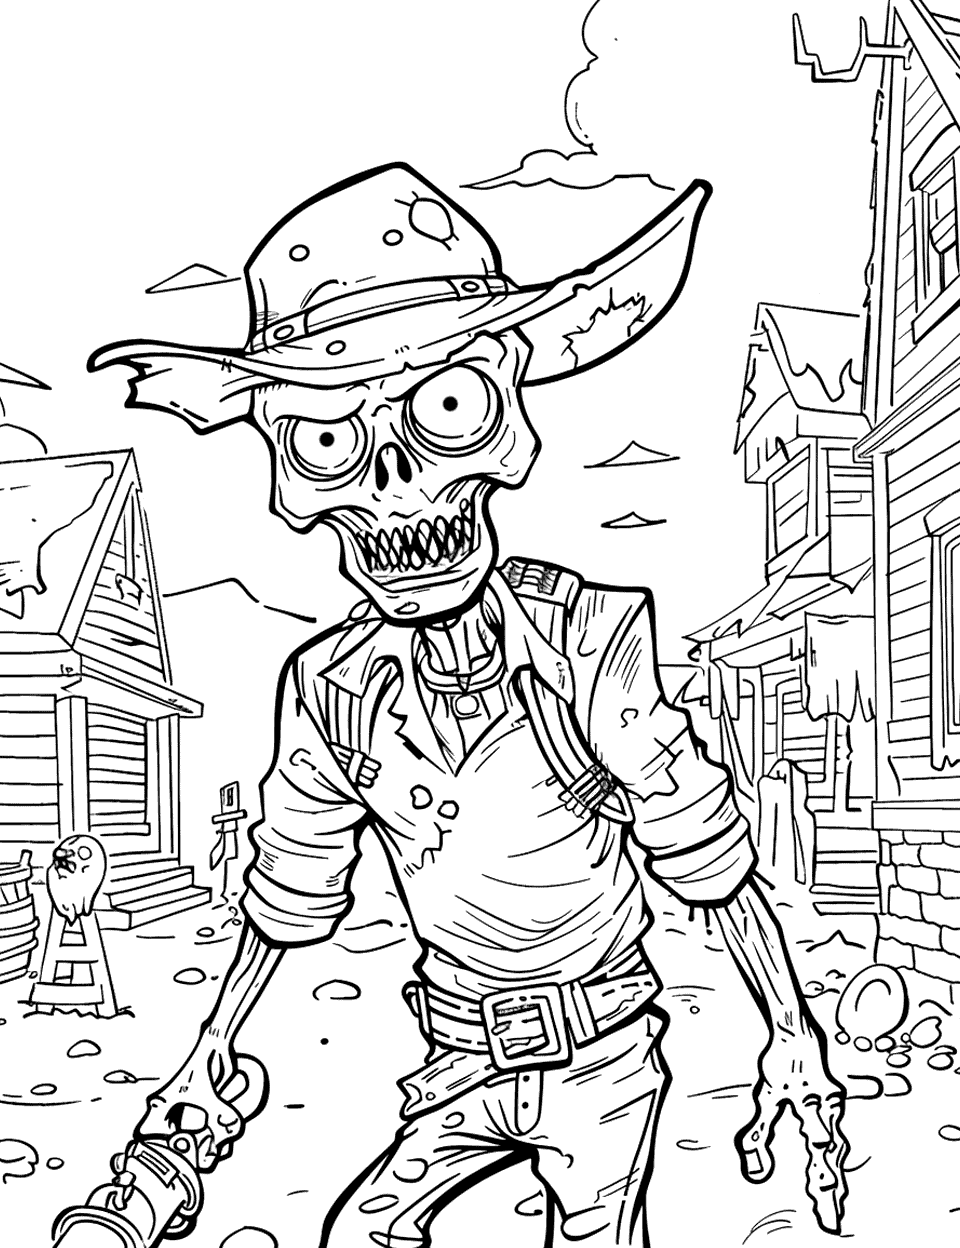 Cowboy Zombie Showdown Coloring Page - A cowboy zombie in a Wild West town.